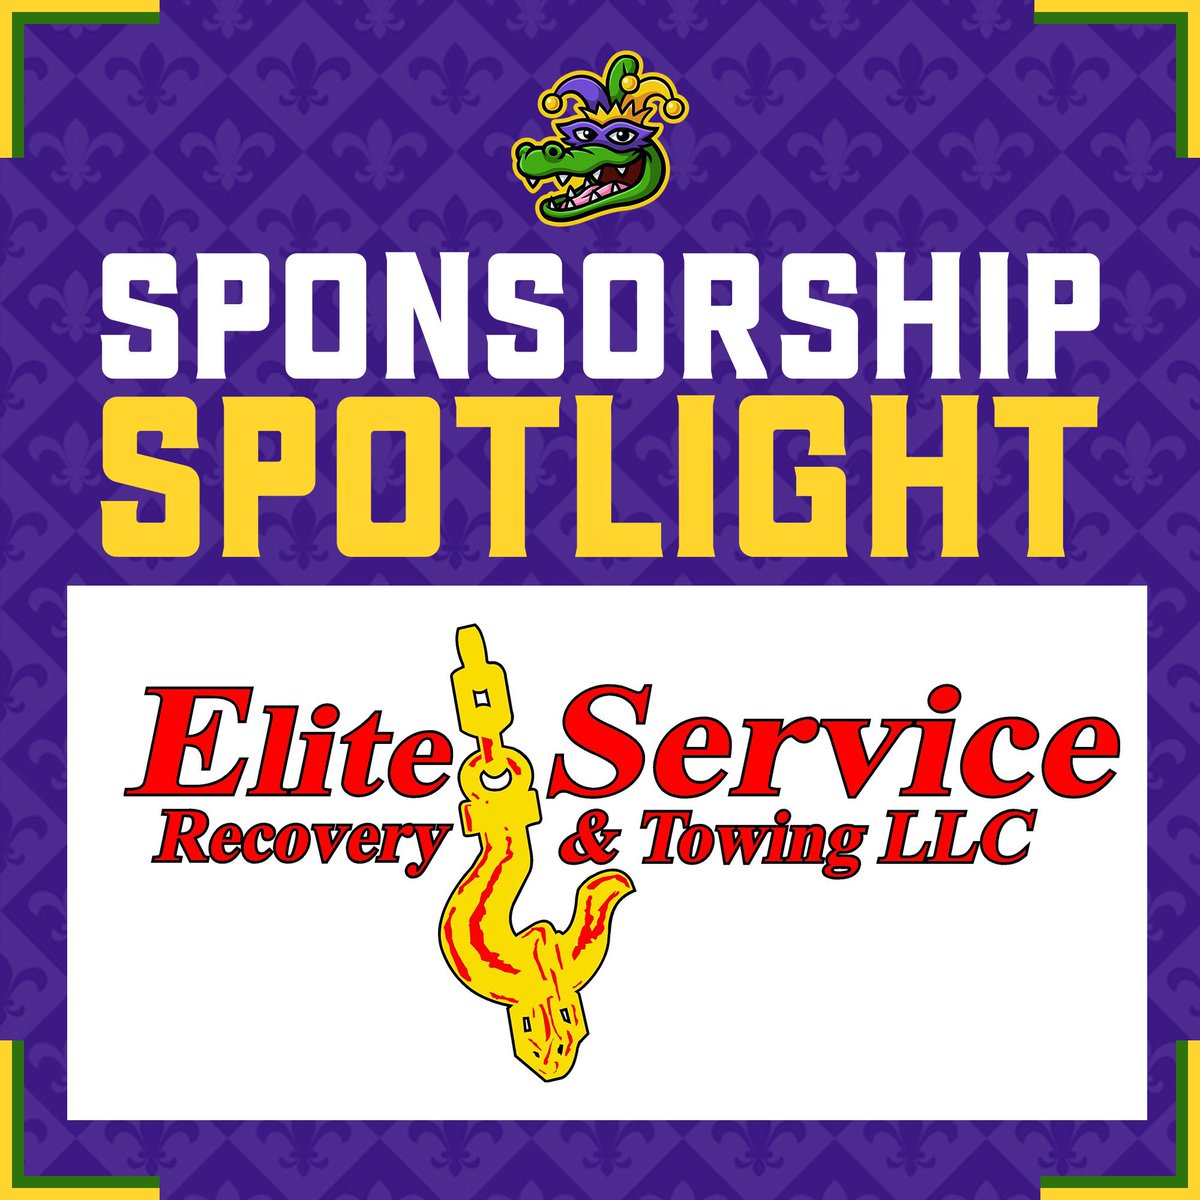 Thank you to Elite Service Recovery & Towing, LLC for sponsoring the Gumbeaux Gators! 🐊⚾️

#gumbeauxgators #geauxgators